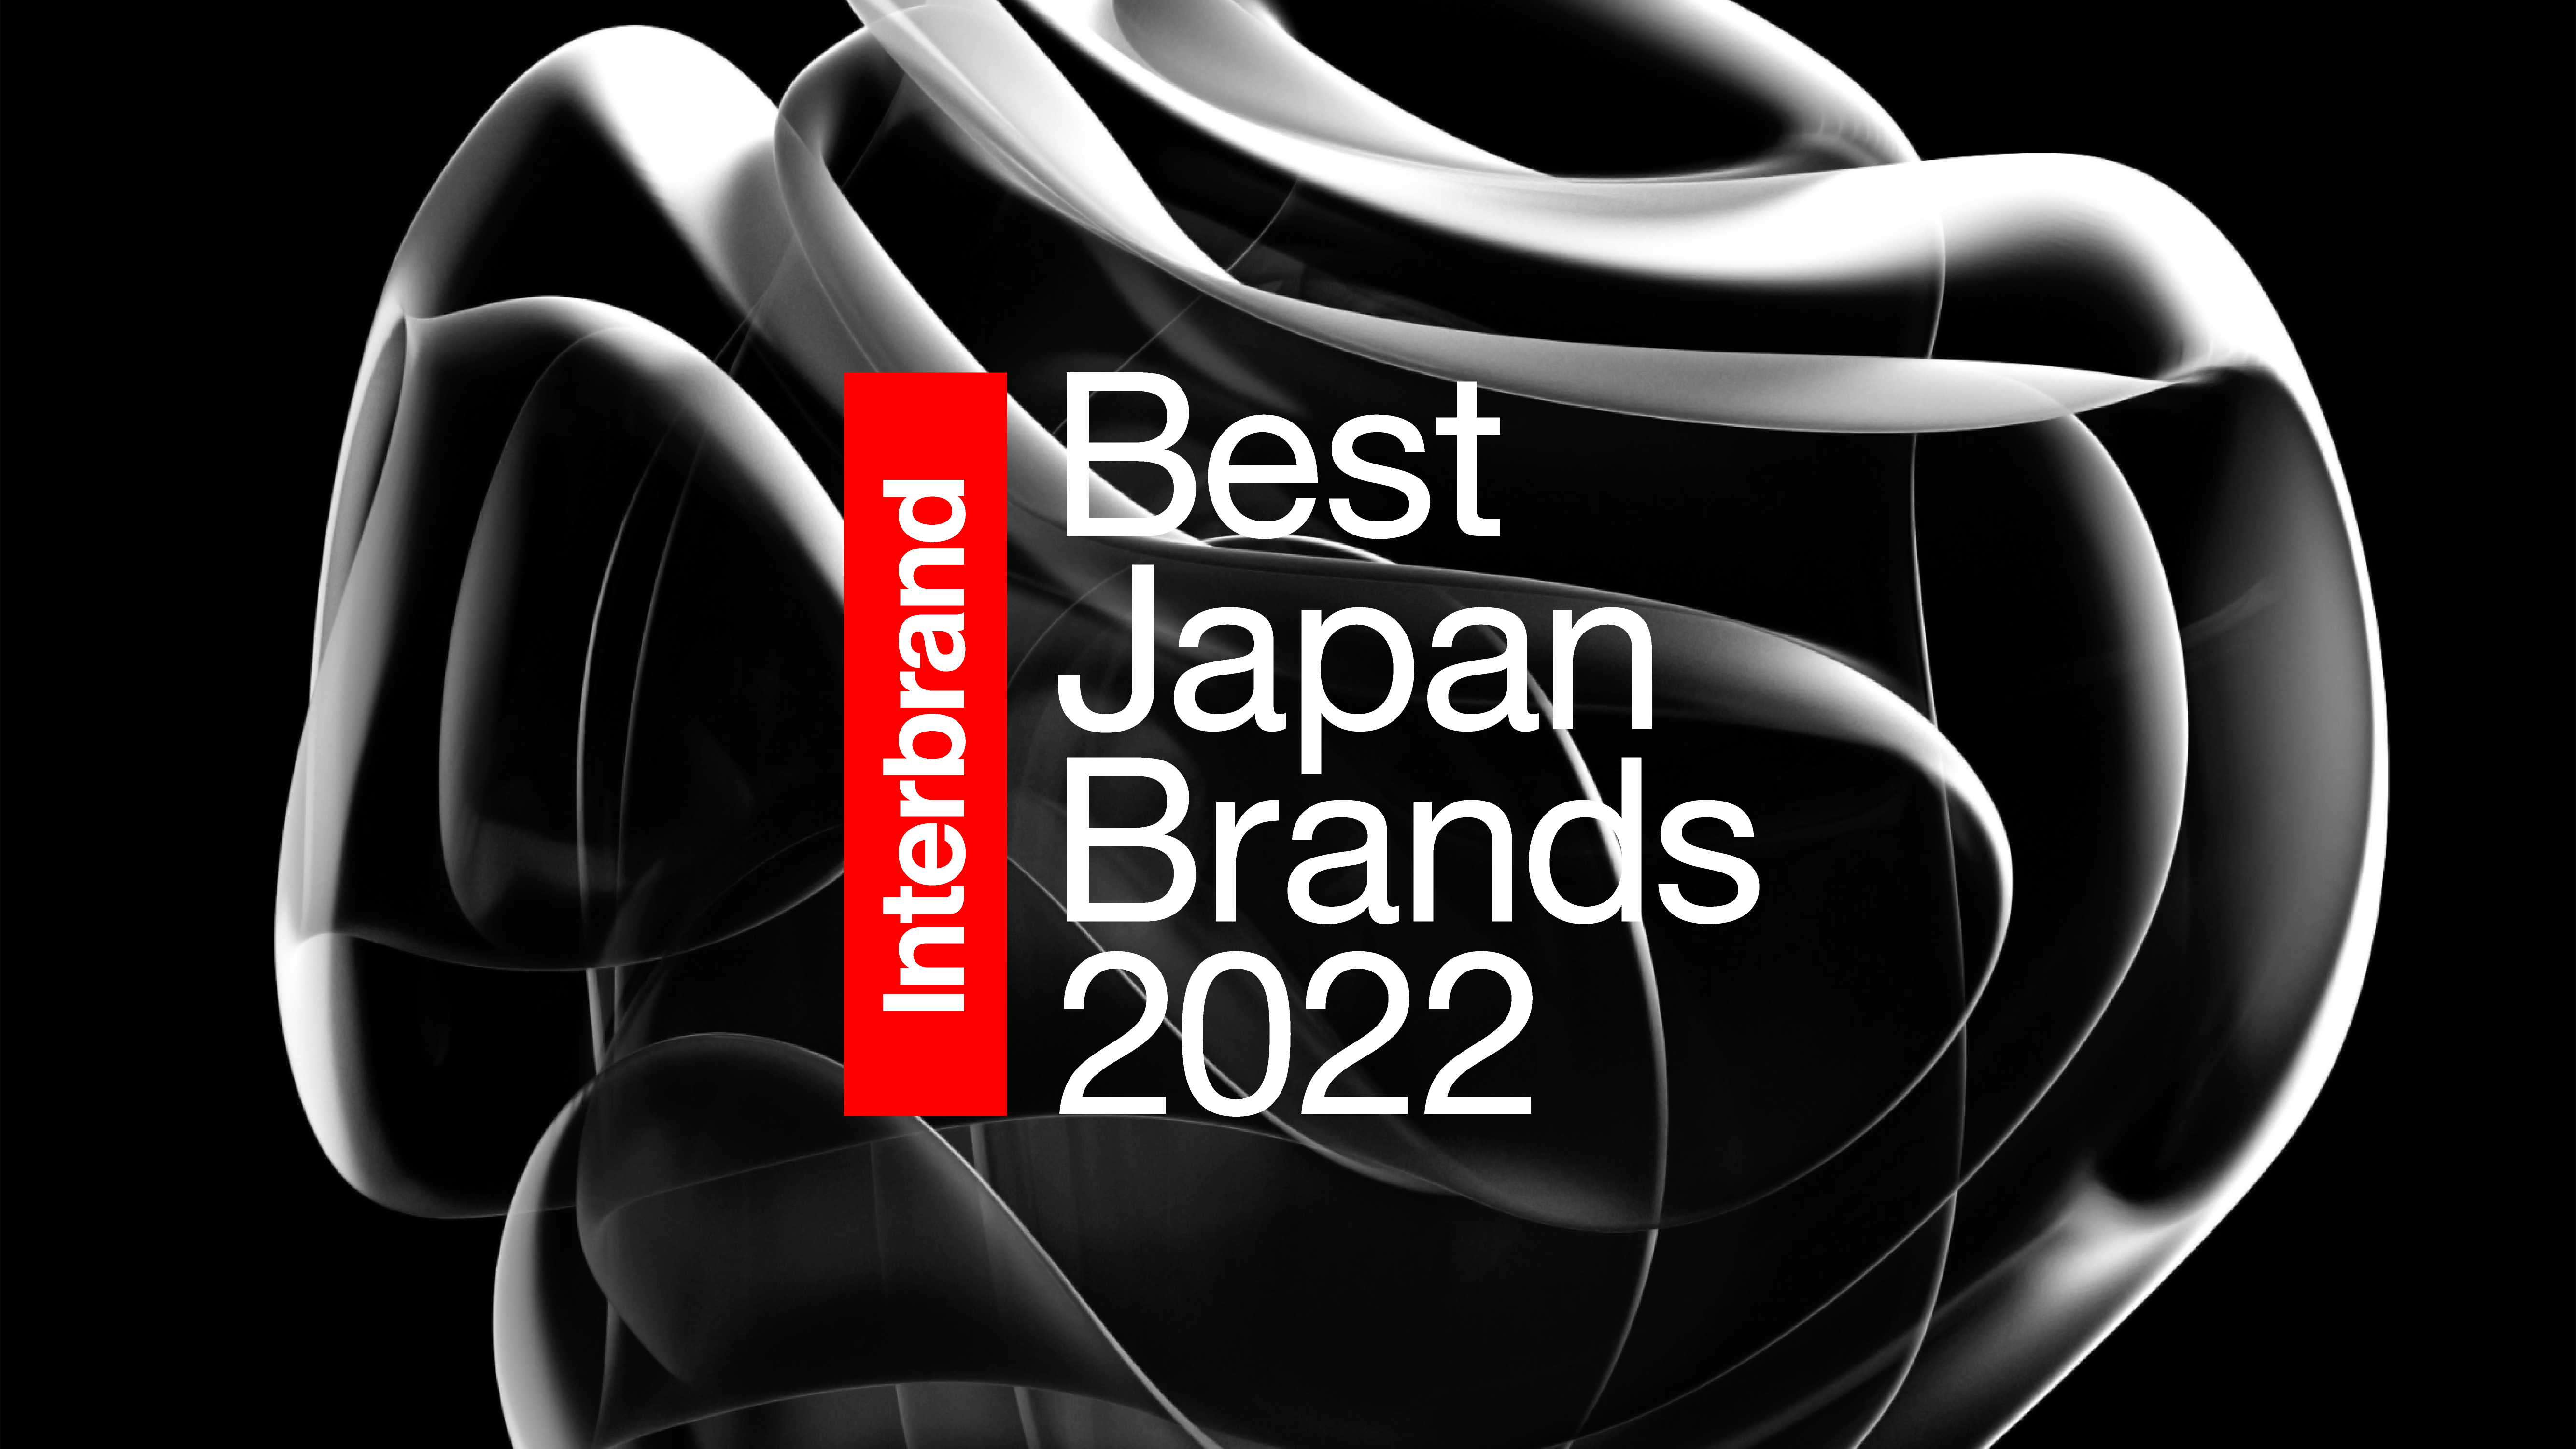 Japanese Appliance Brands That Emphasize Design and Function